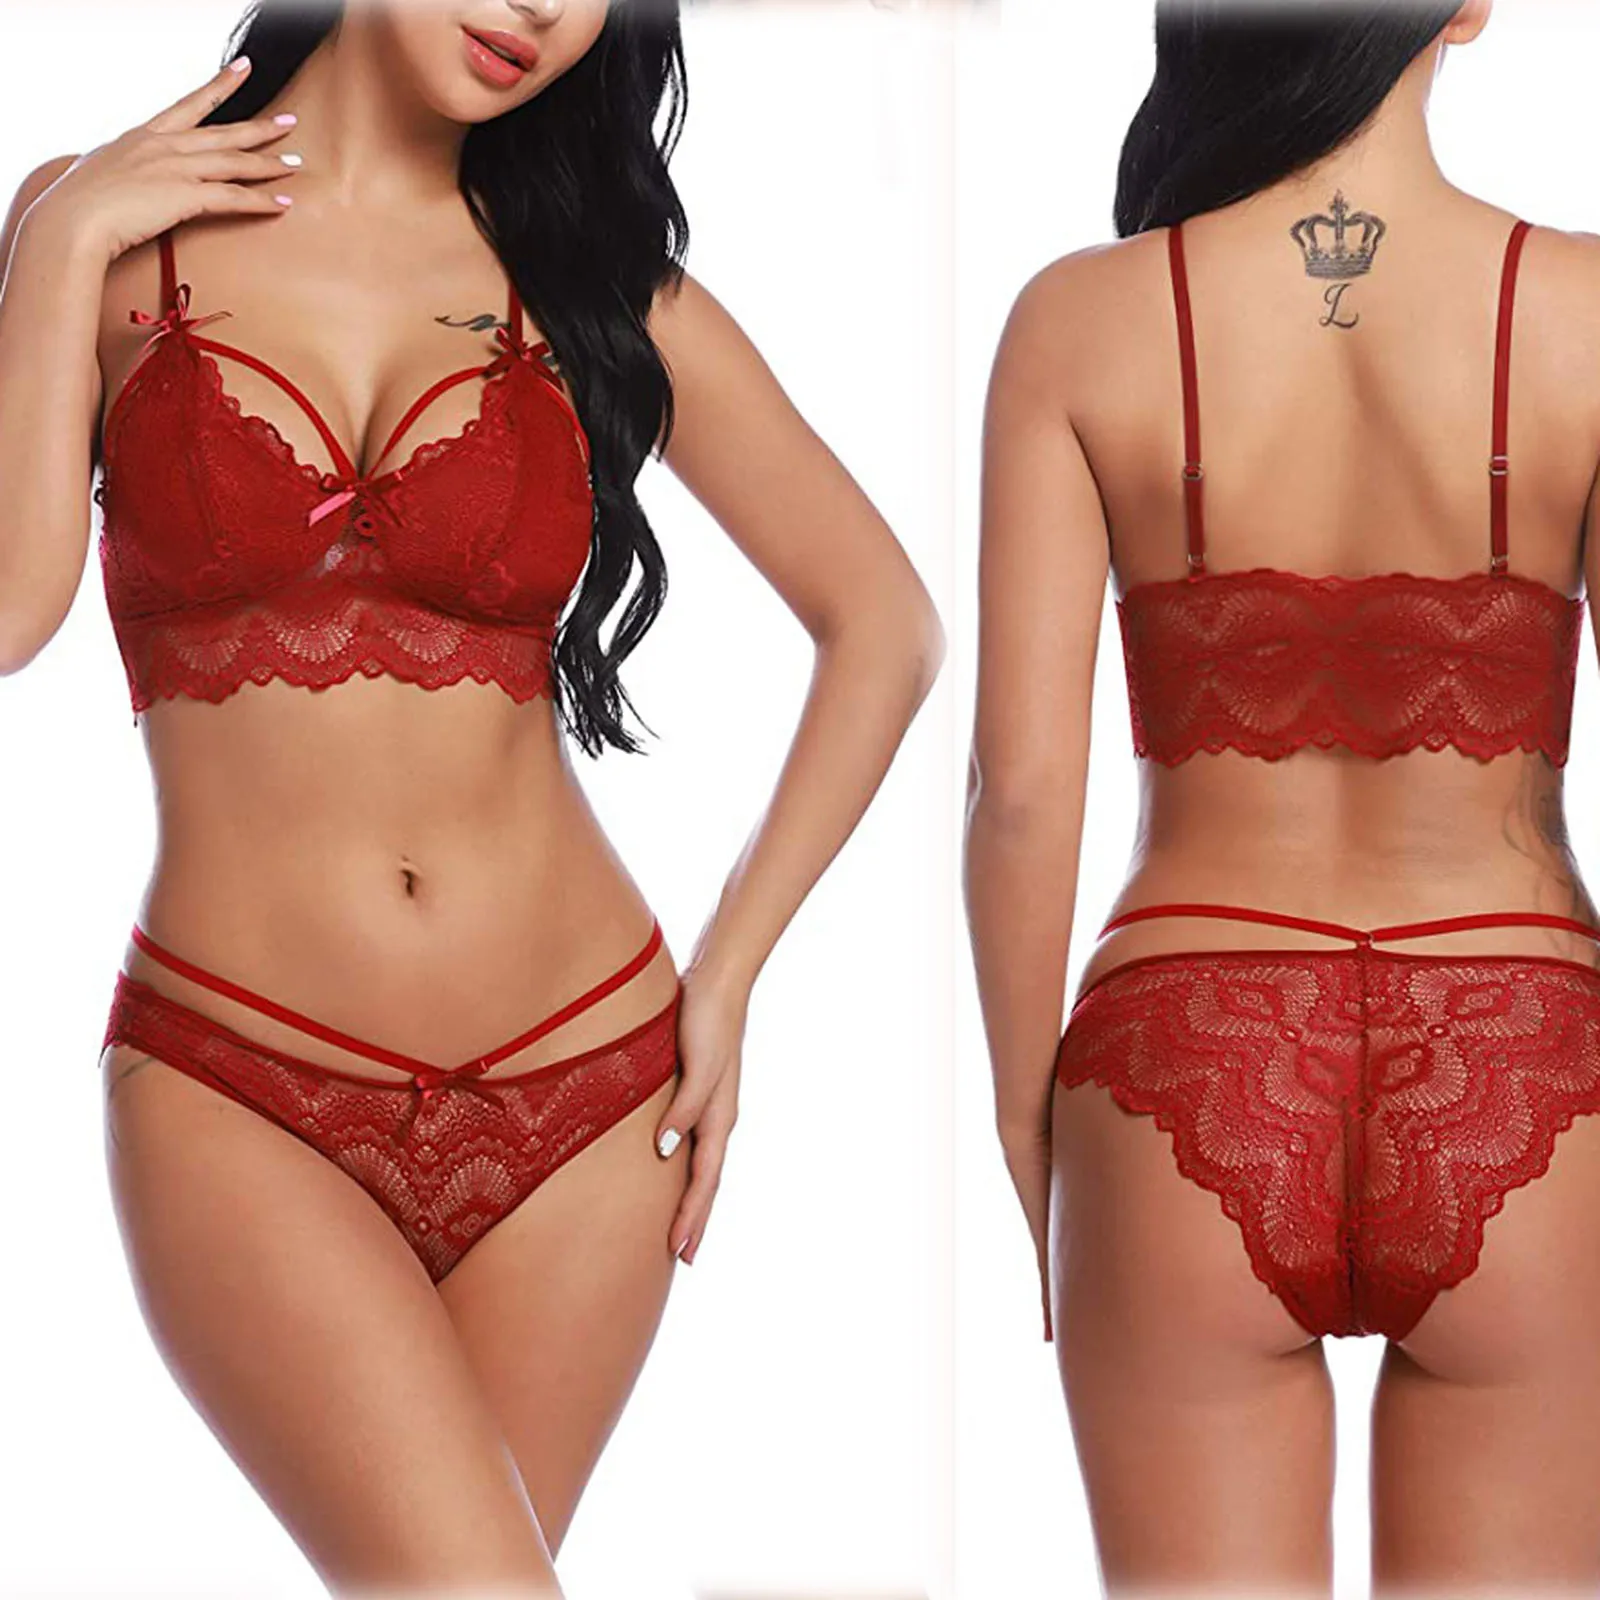 

New Hot Perspective Sexy Lingerie Women Fashion Lace Bra Brief Sets Sexy Underwear Set Erotic Lingerie Sleepwear For Woman